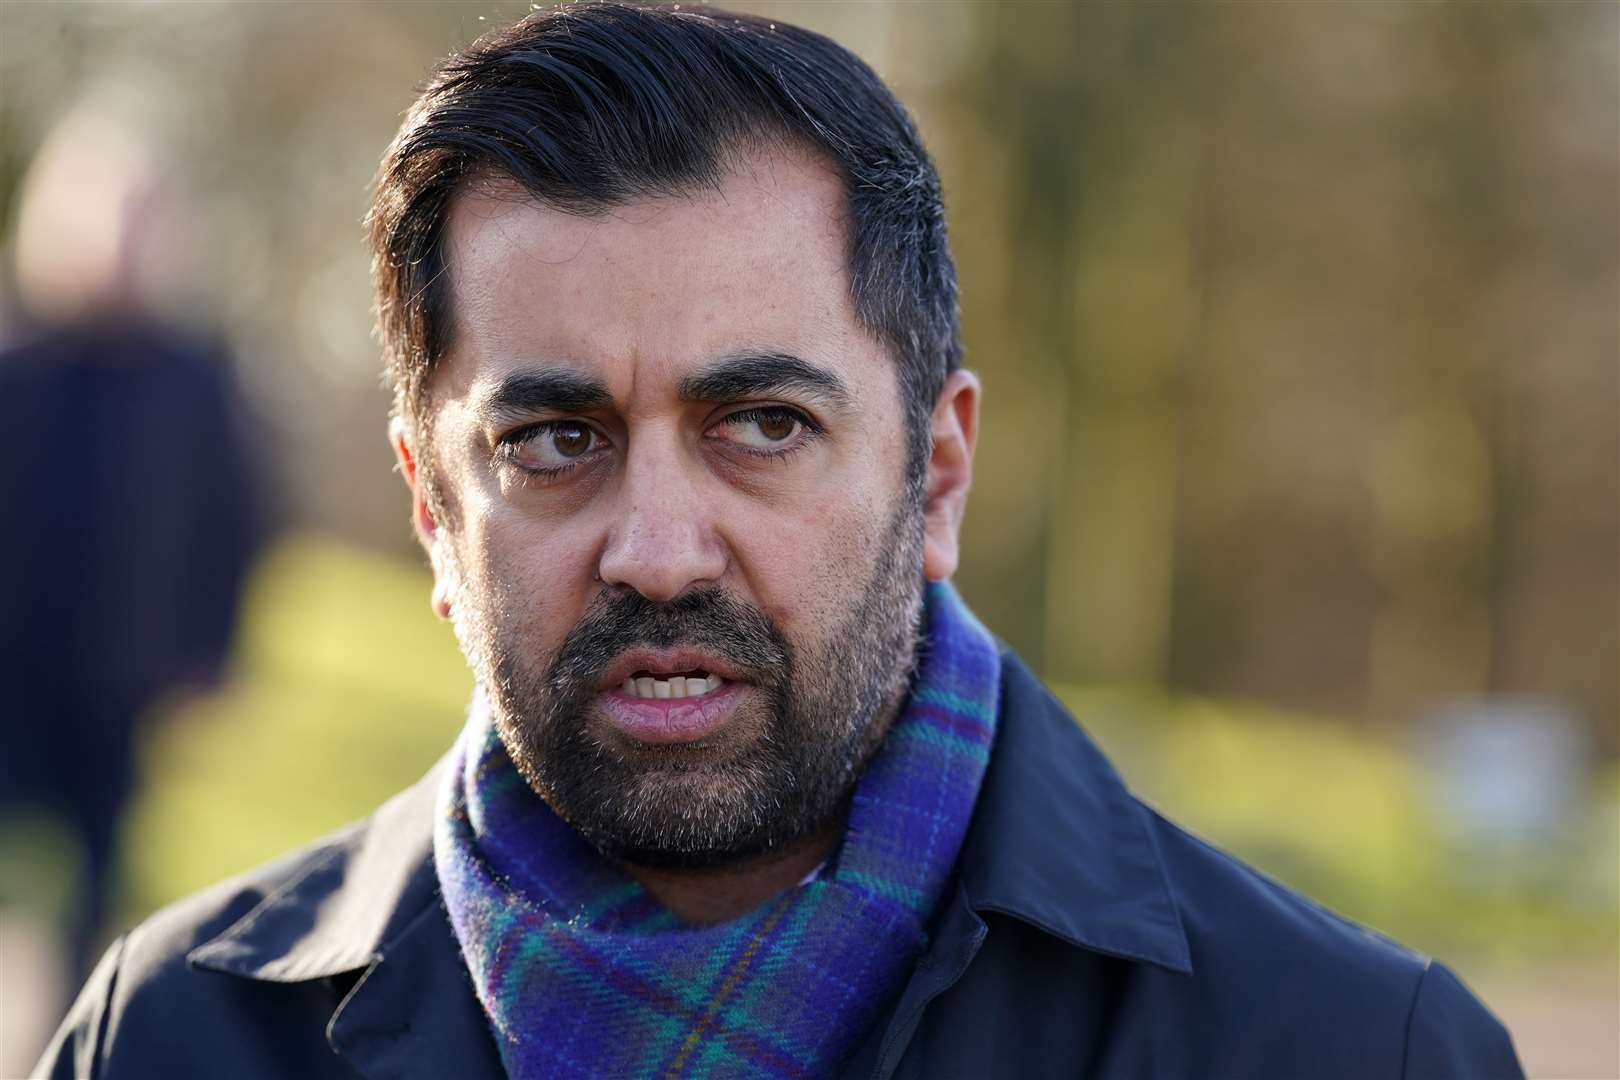 Humza Yousaf described developments in the Middle East overnight as ‘extremely concerning’ (Andrew Milligan/PA)